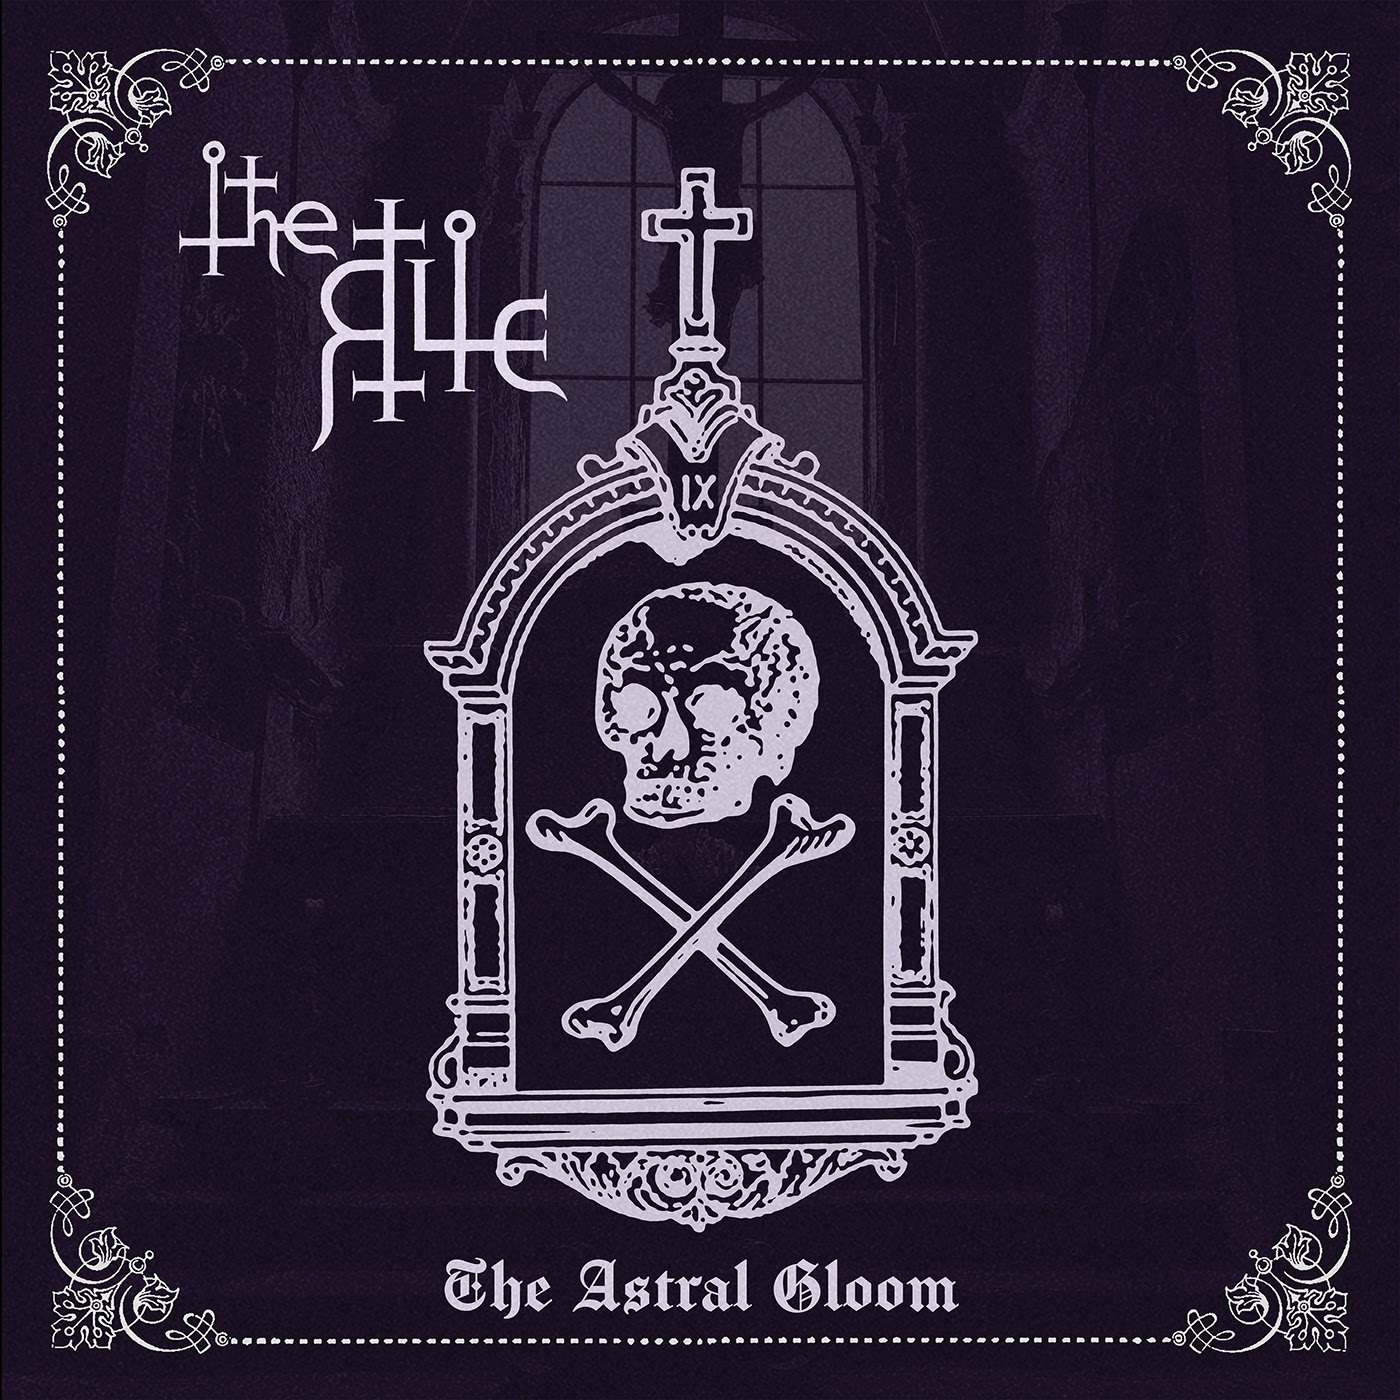 the rite – the astral gloom